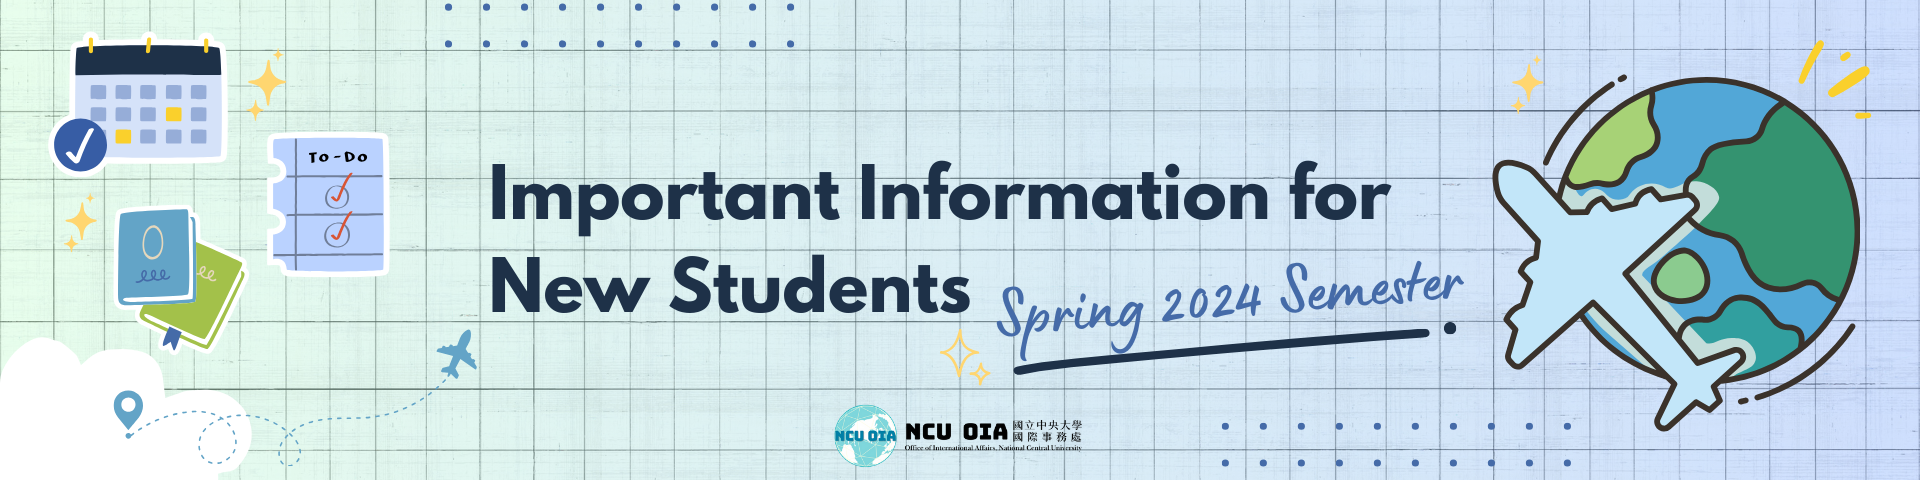 Important Information for New Students of Spring 2024 Semester